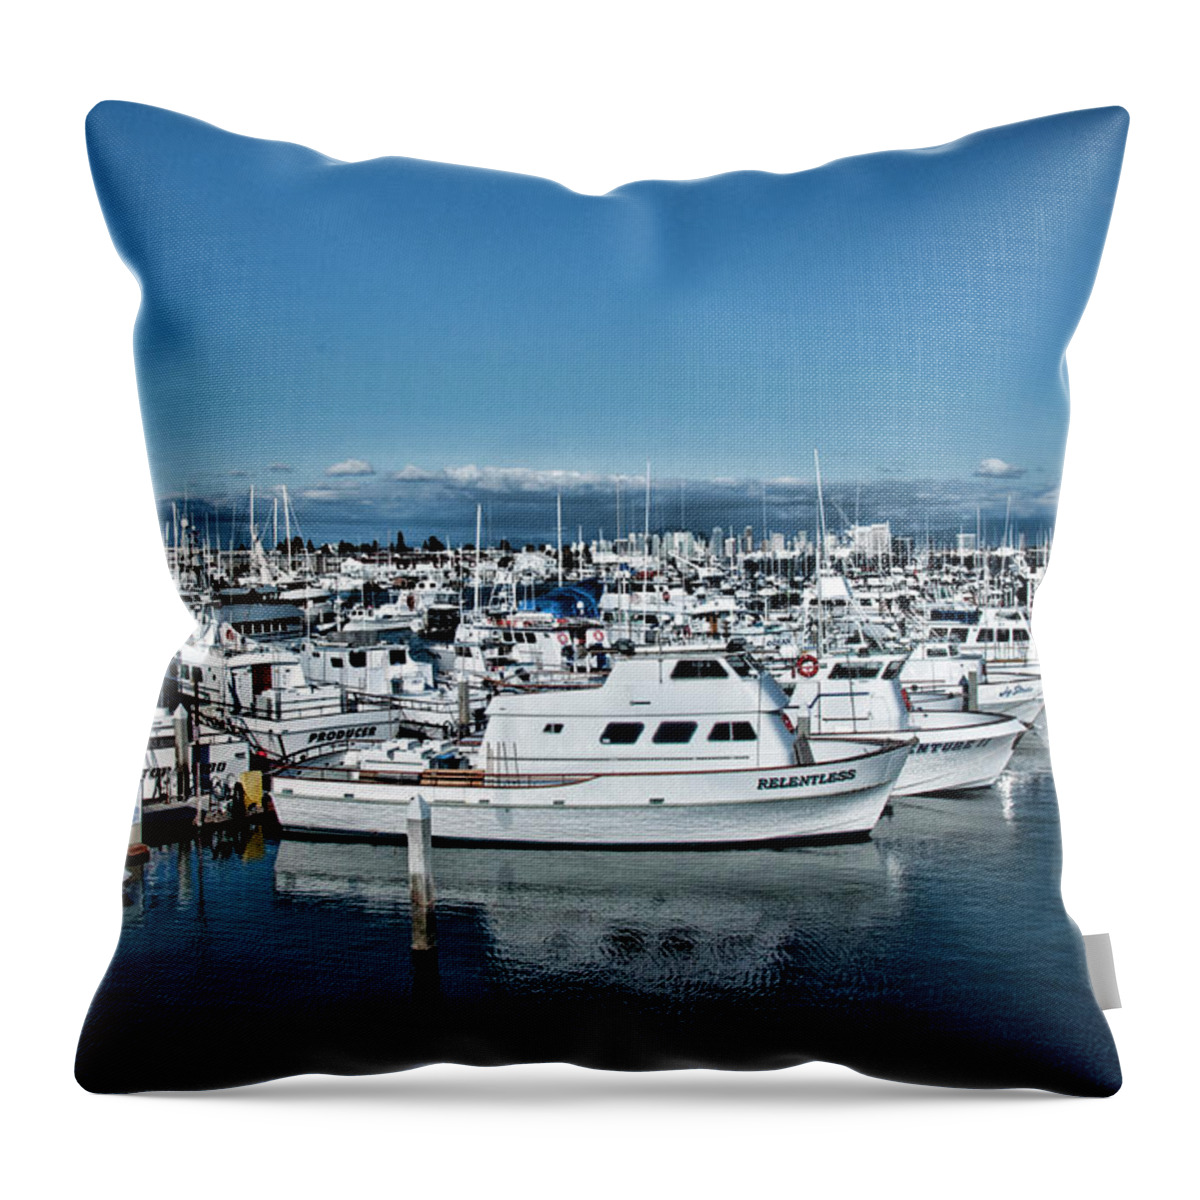 Land And Sea Scape Of San Diego Marina And Skyline Throw Pillow featuring the photograph San Diego Marina and City Skyline by Daniel Hebard